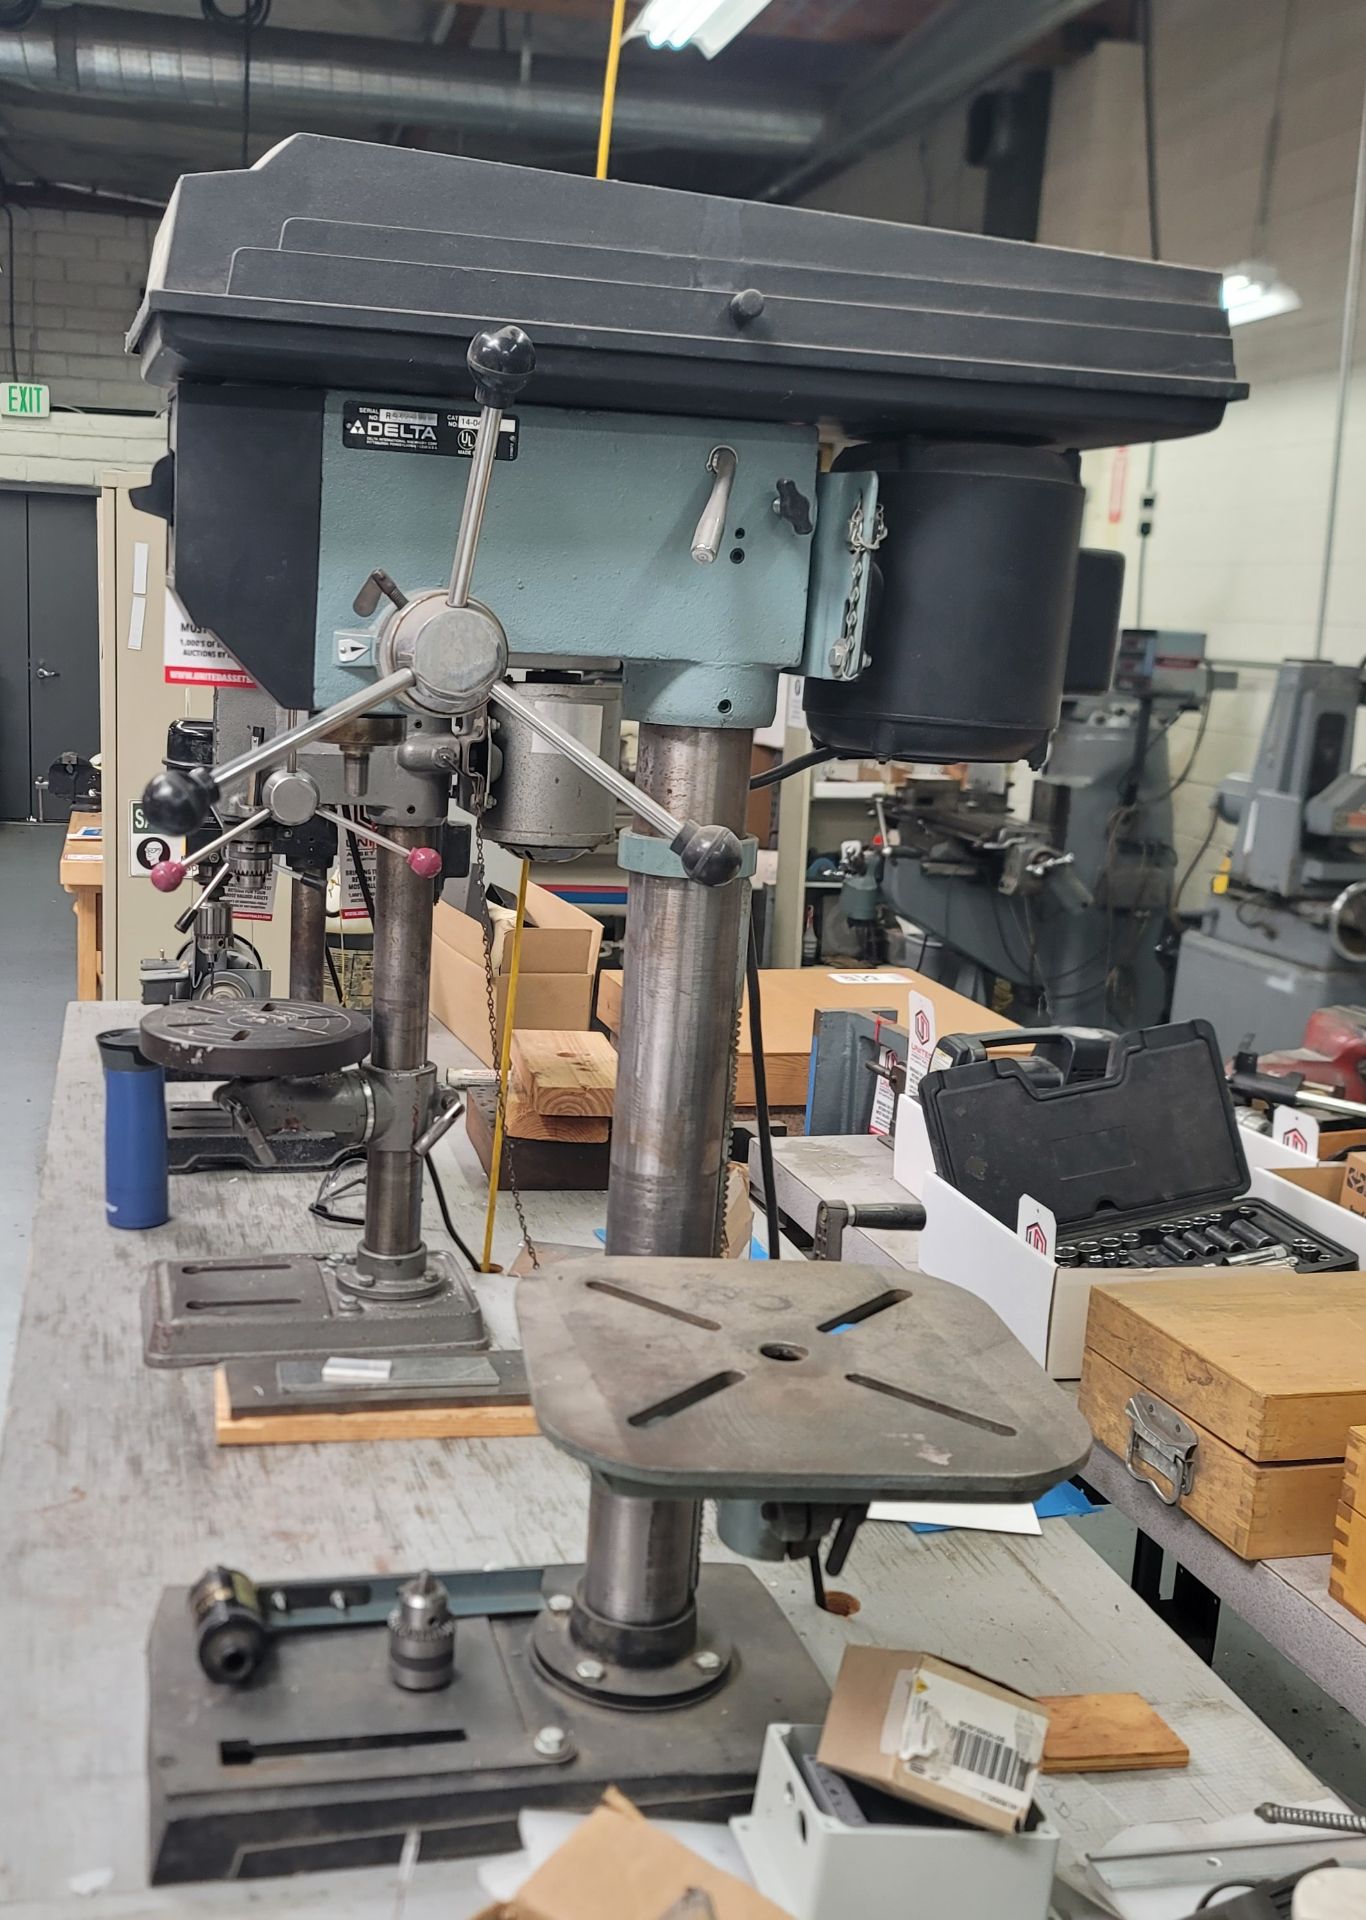 DELTA 14" BENCHTOP DRILL PRESS, MODEL 14-040, S/N R9323, W/ CHUCK AND TAPPER - Image 2 of 5